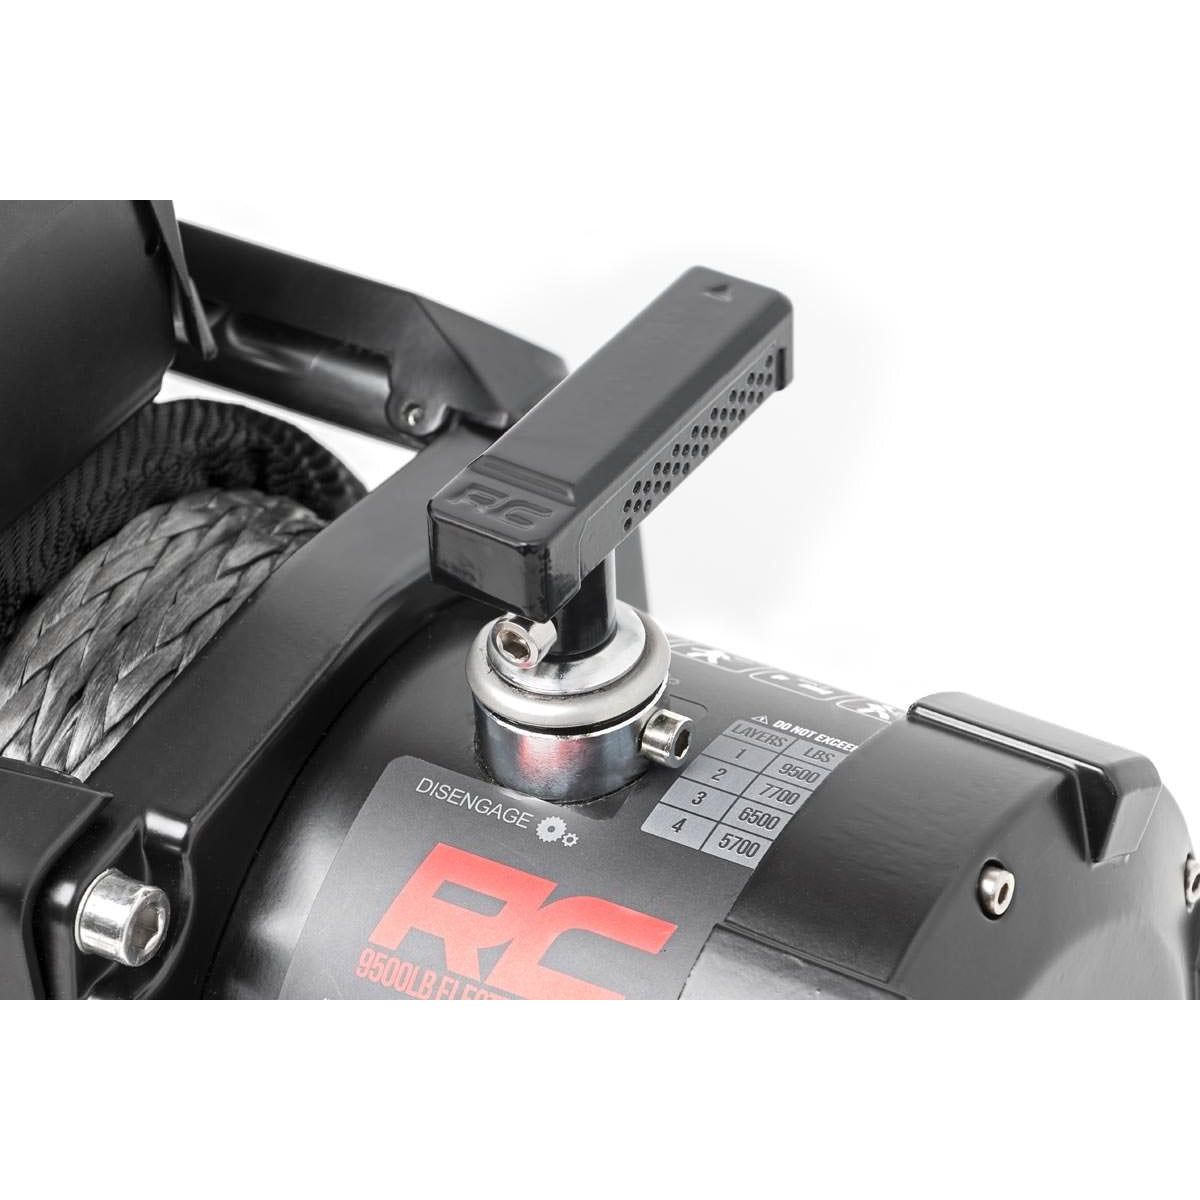 Rough Country  9500-Lb Pro Series Winch - Synthetic Rope PRO9500S